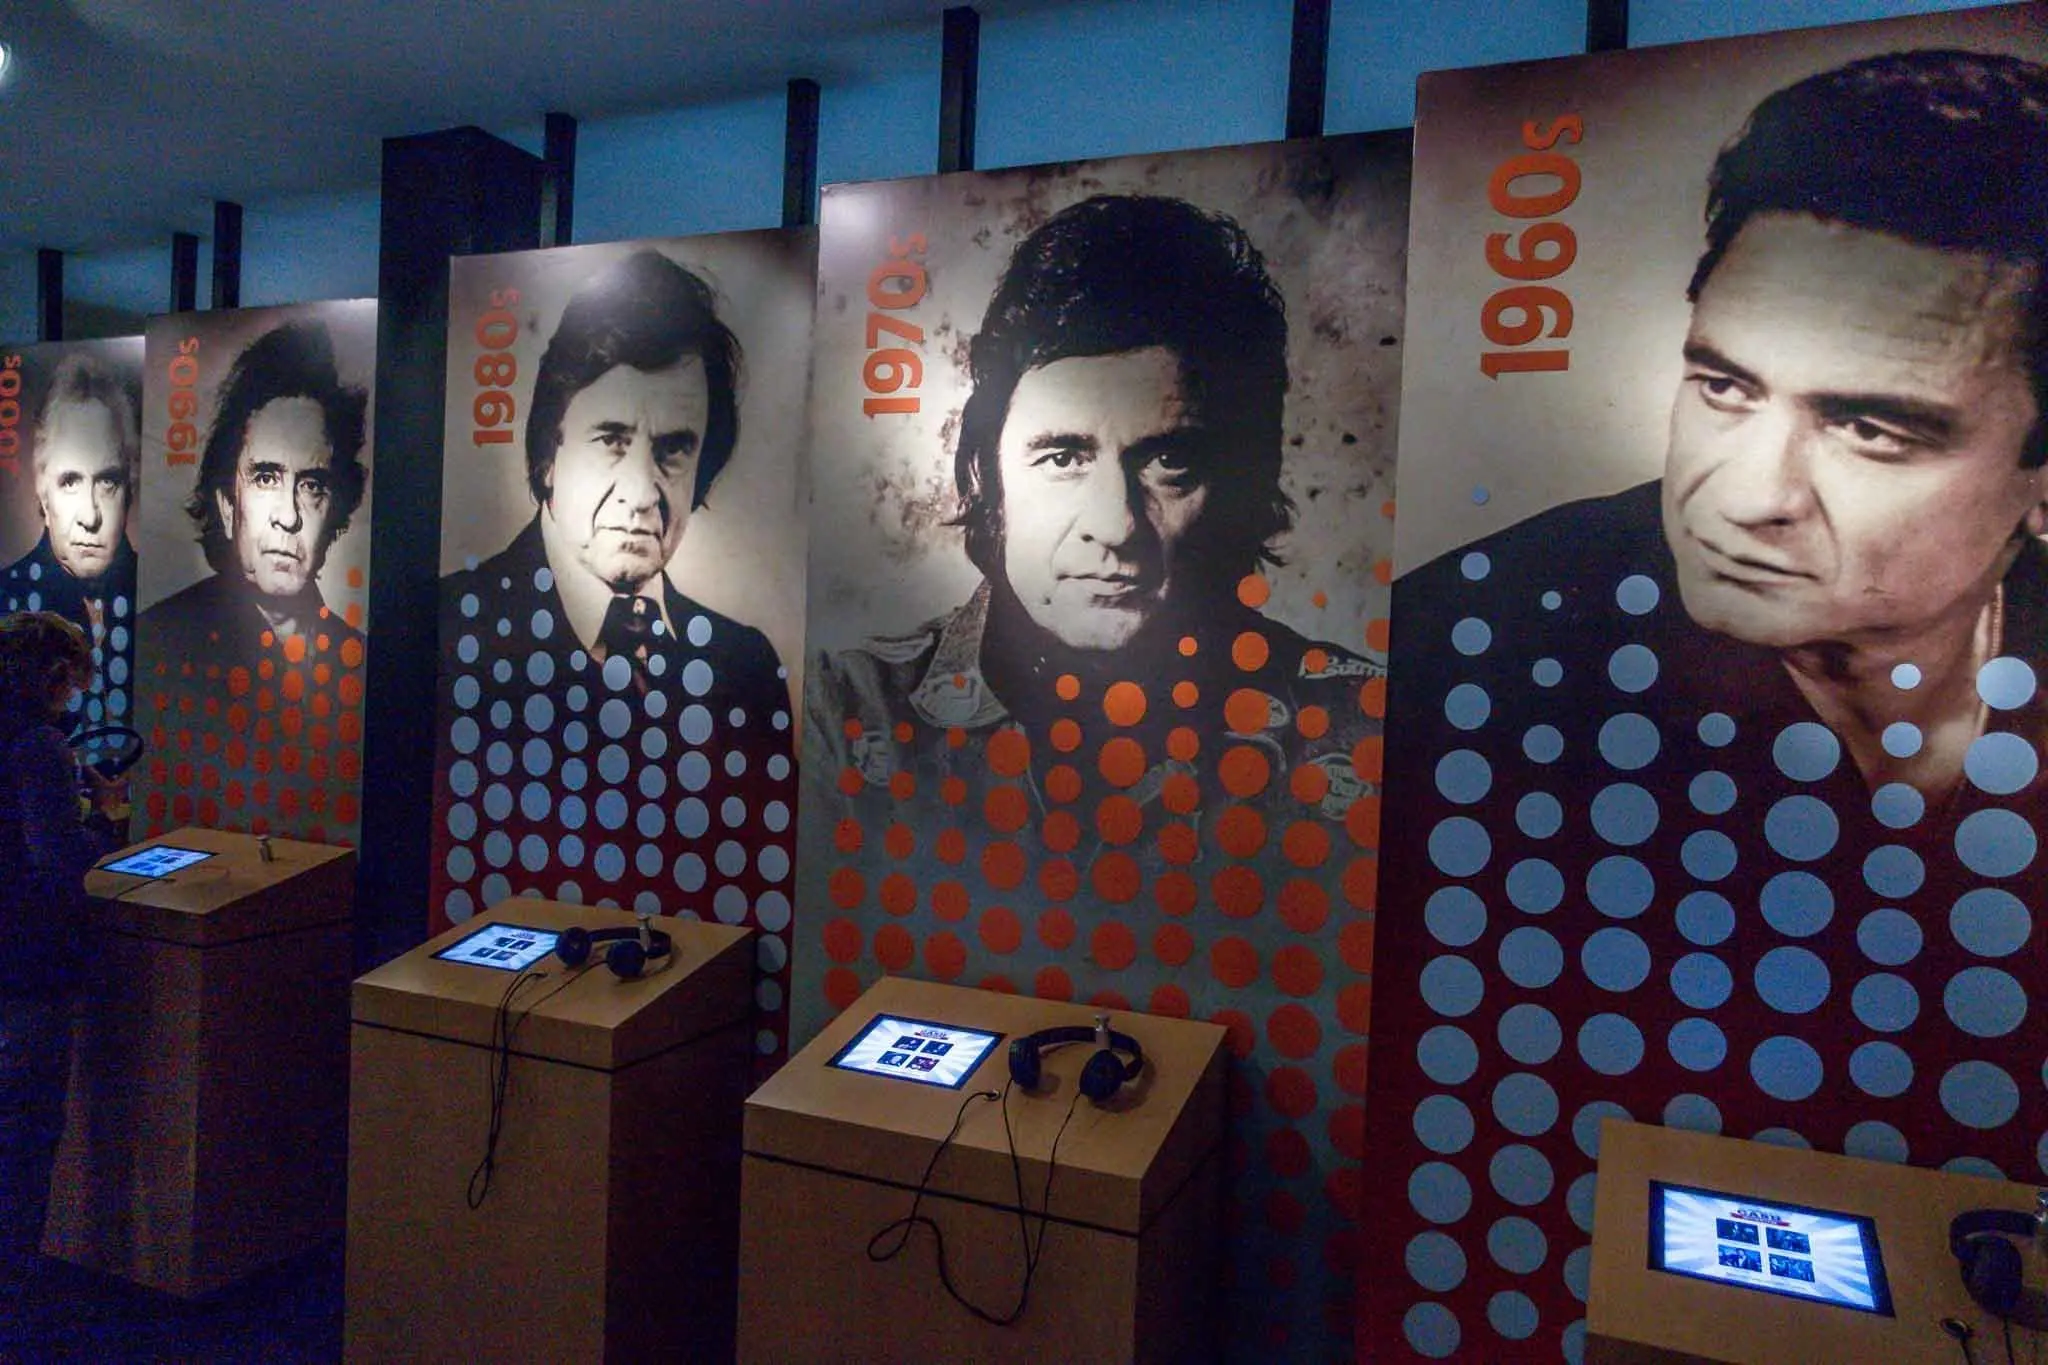 Interactive museum exhibits with photos of Johnny Cash